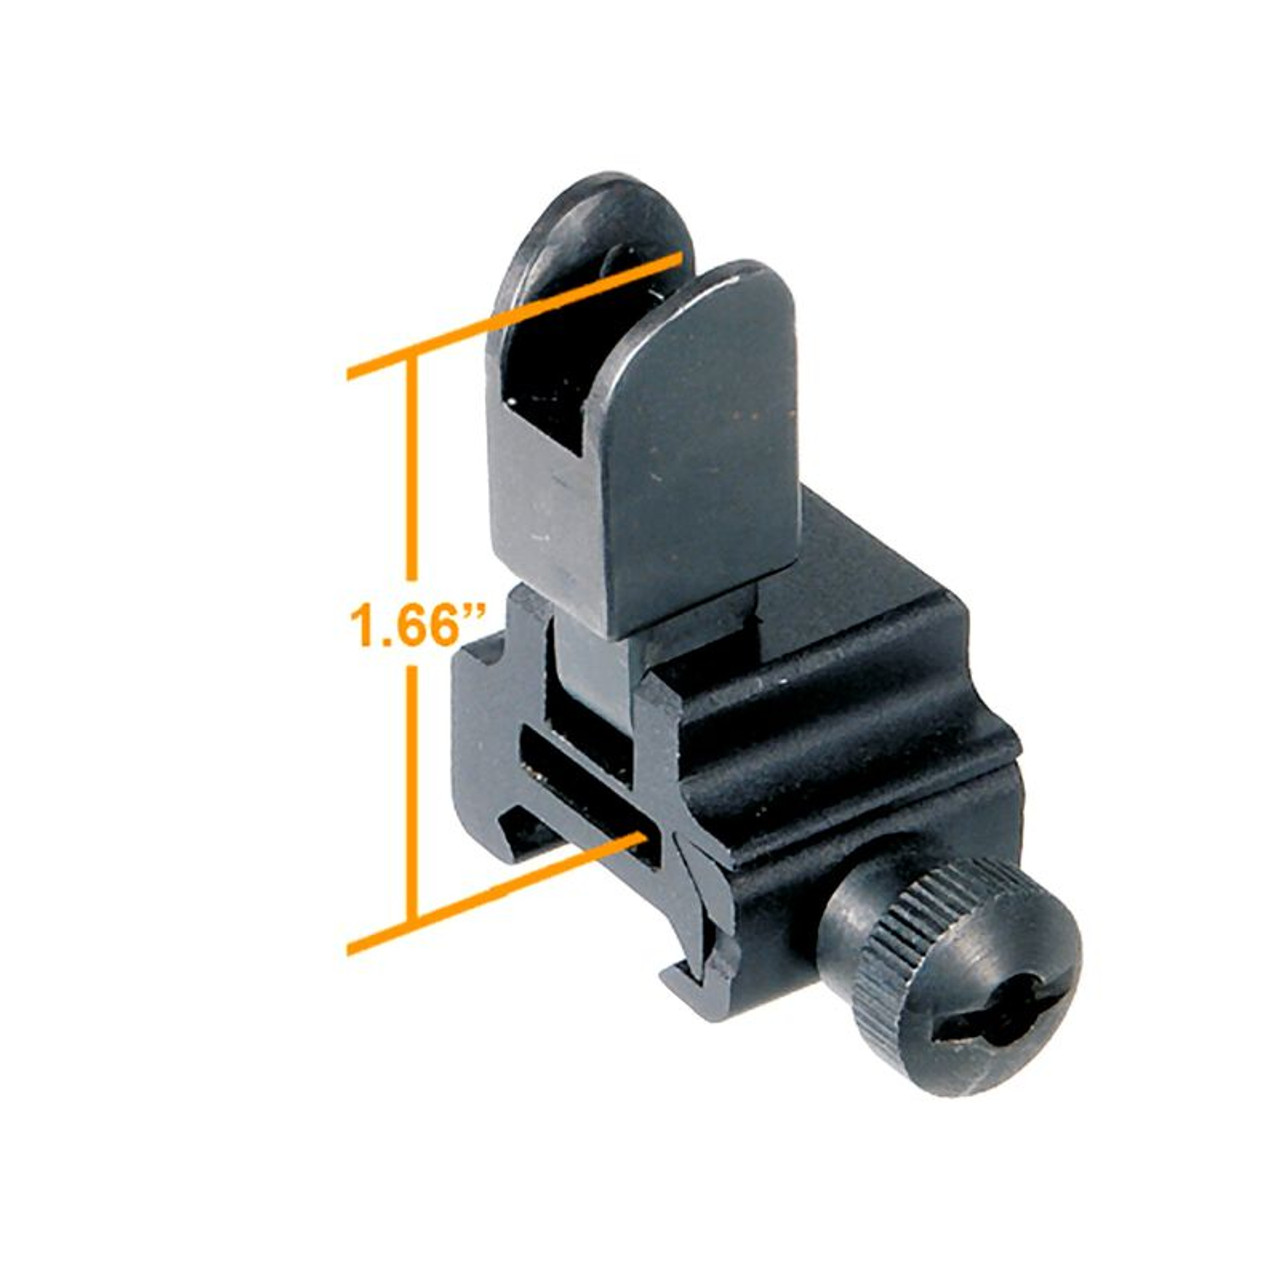 Leapers UTG High Flip-up Front Sight for Regular Height Gas Block MNT-751 